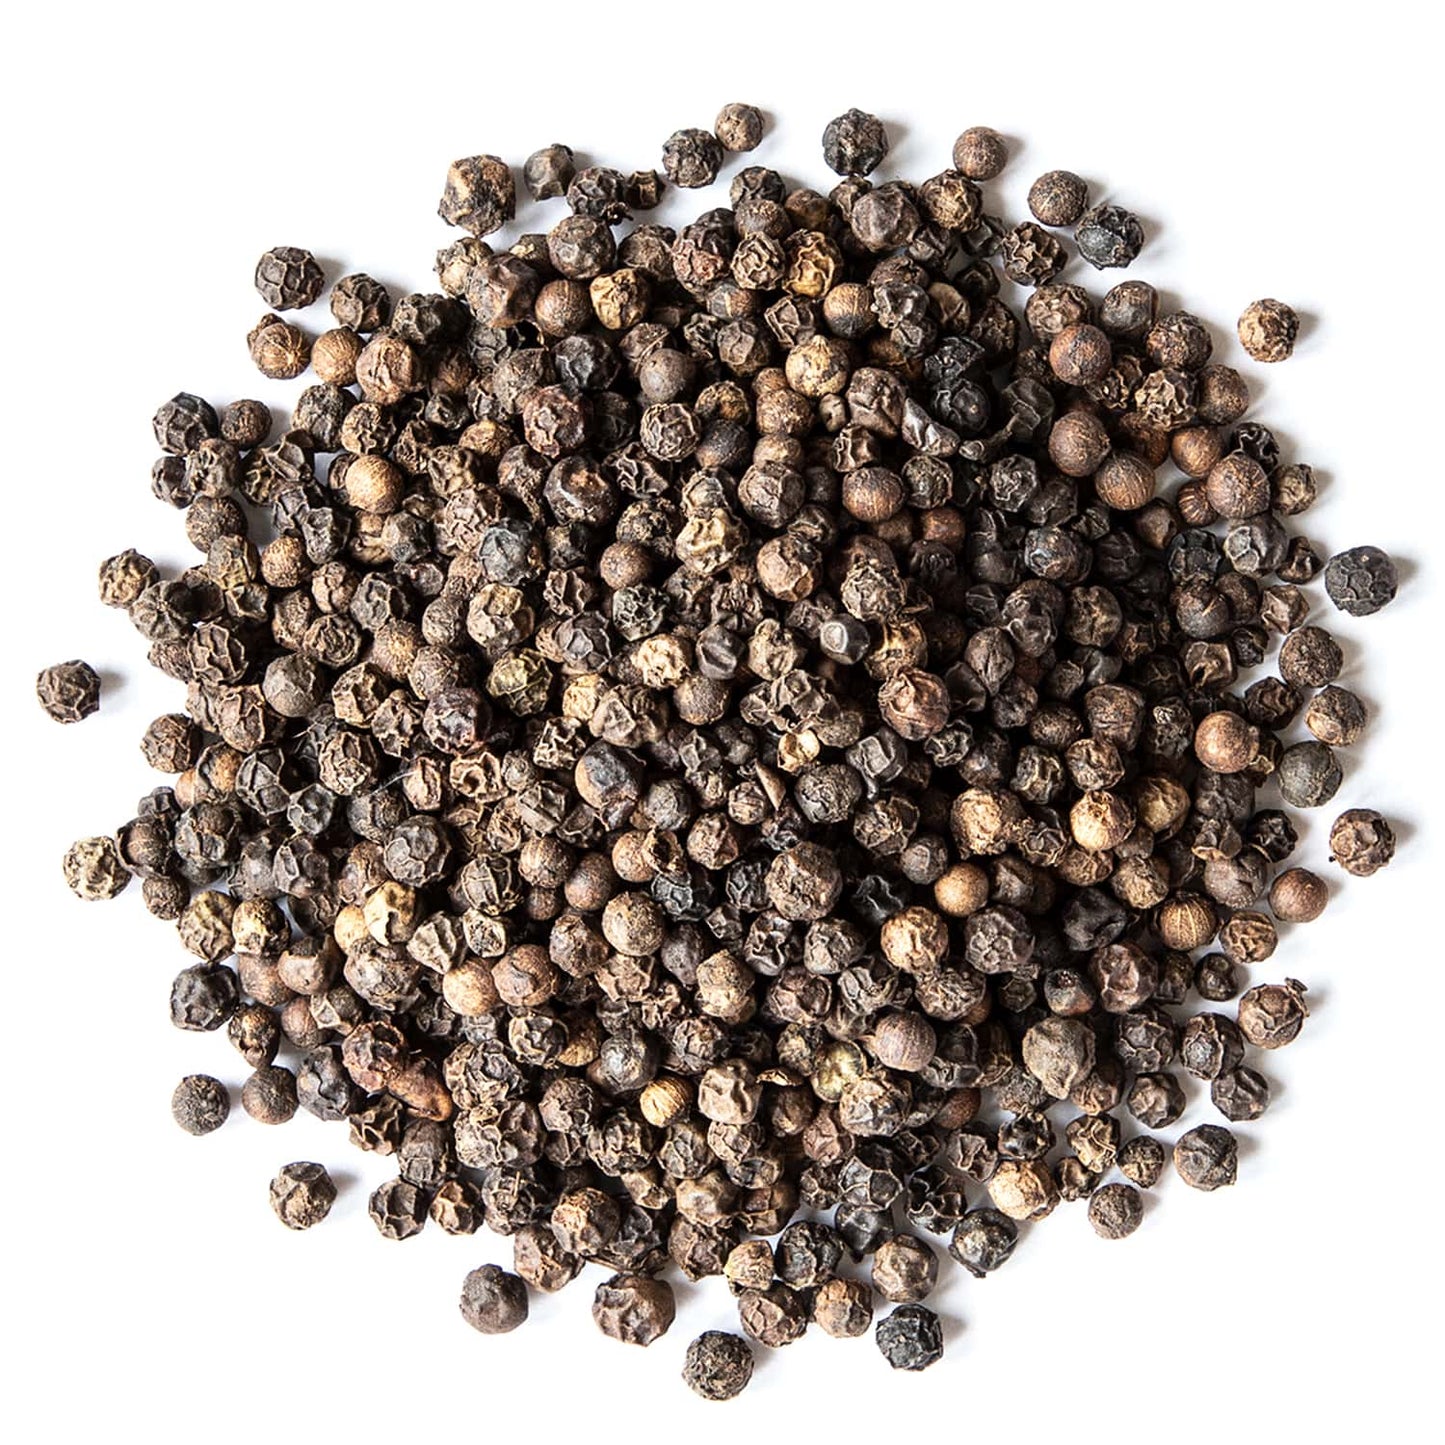 Organic Black Pepper - Whole Dried Peppercorns, Non-GMO, Kosher, Vegan, Bulk, Great for Spicing and Seasoning - by Food to Live